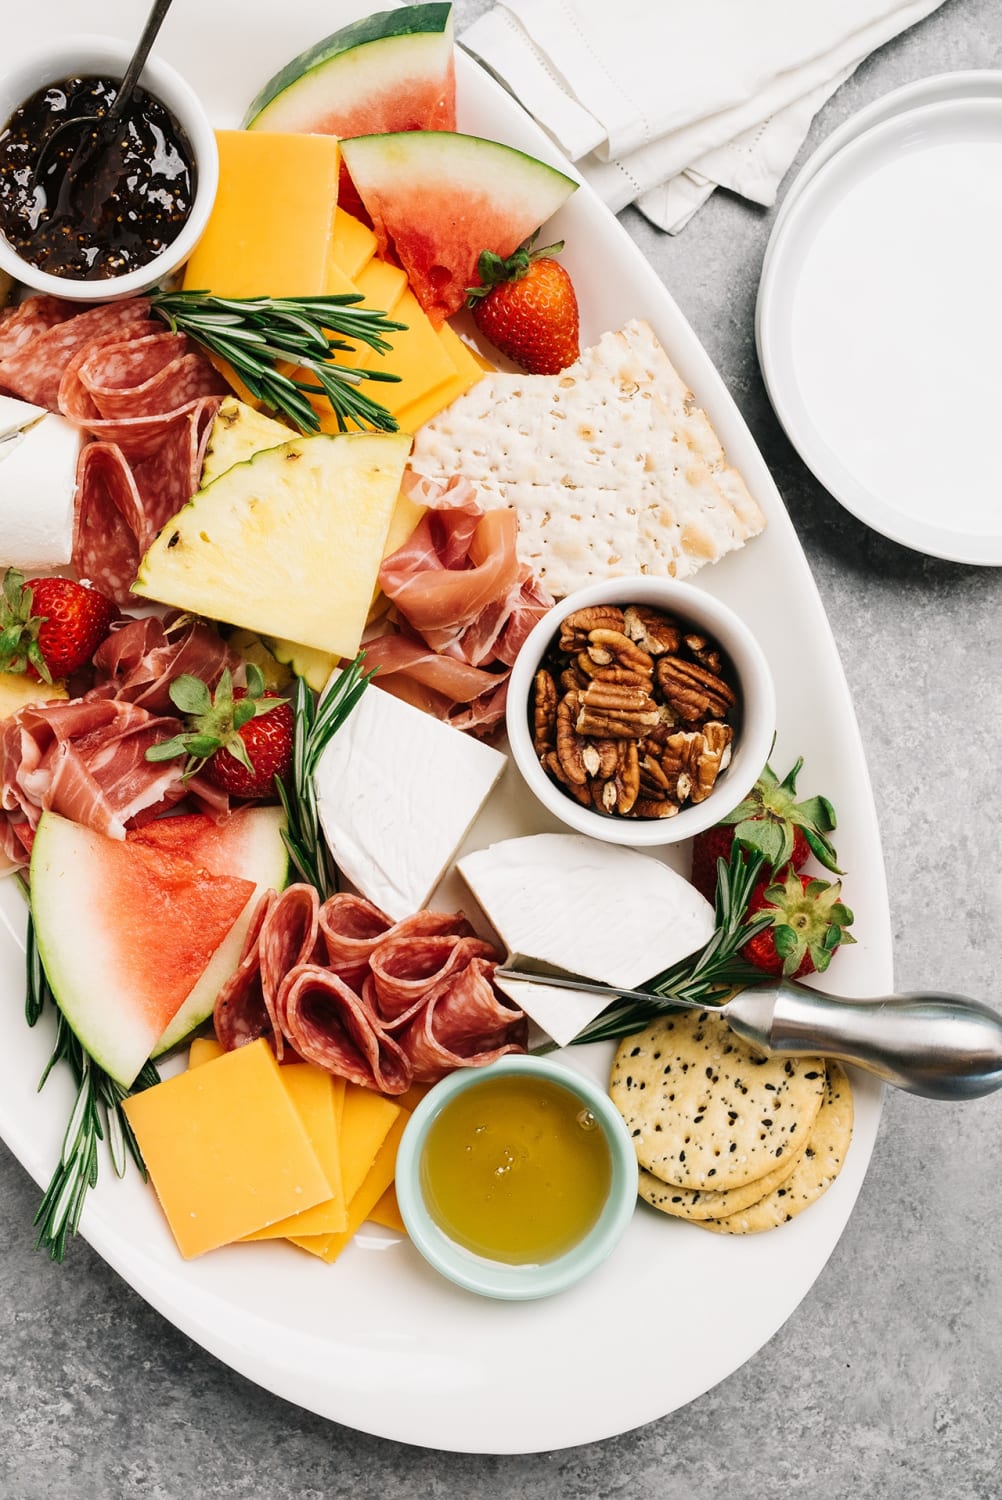 Tips & ideas for how to build the ultimate summer charcuterie board!